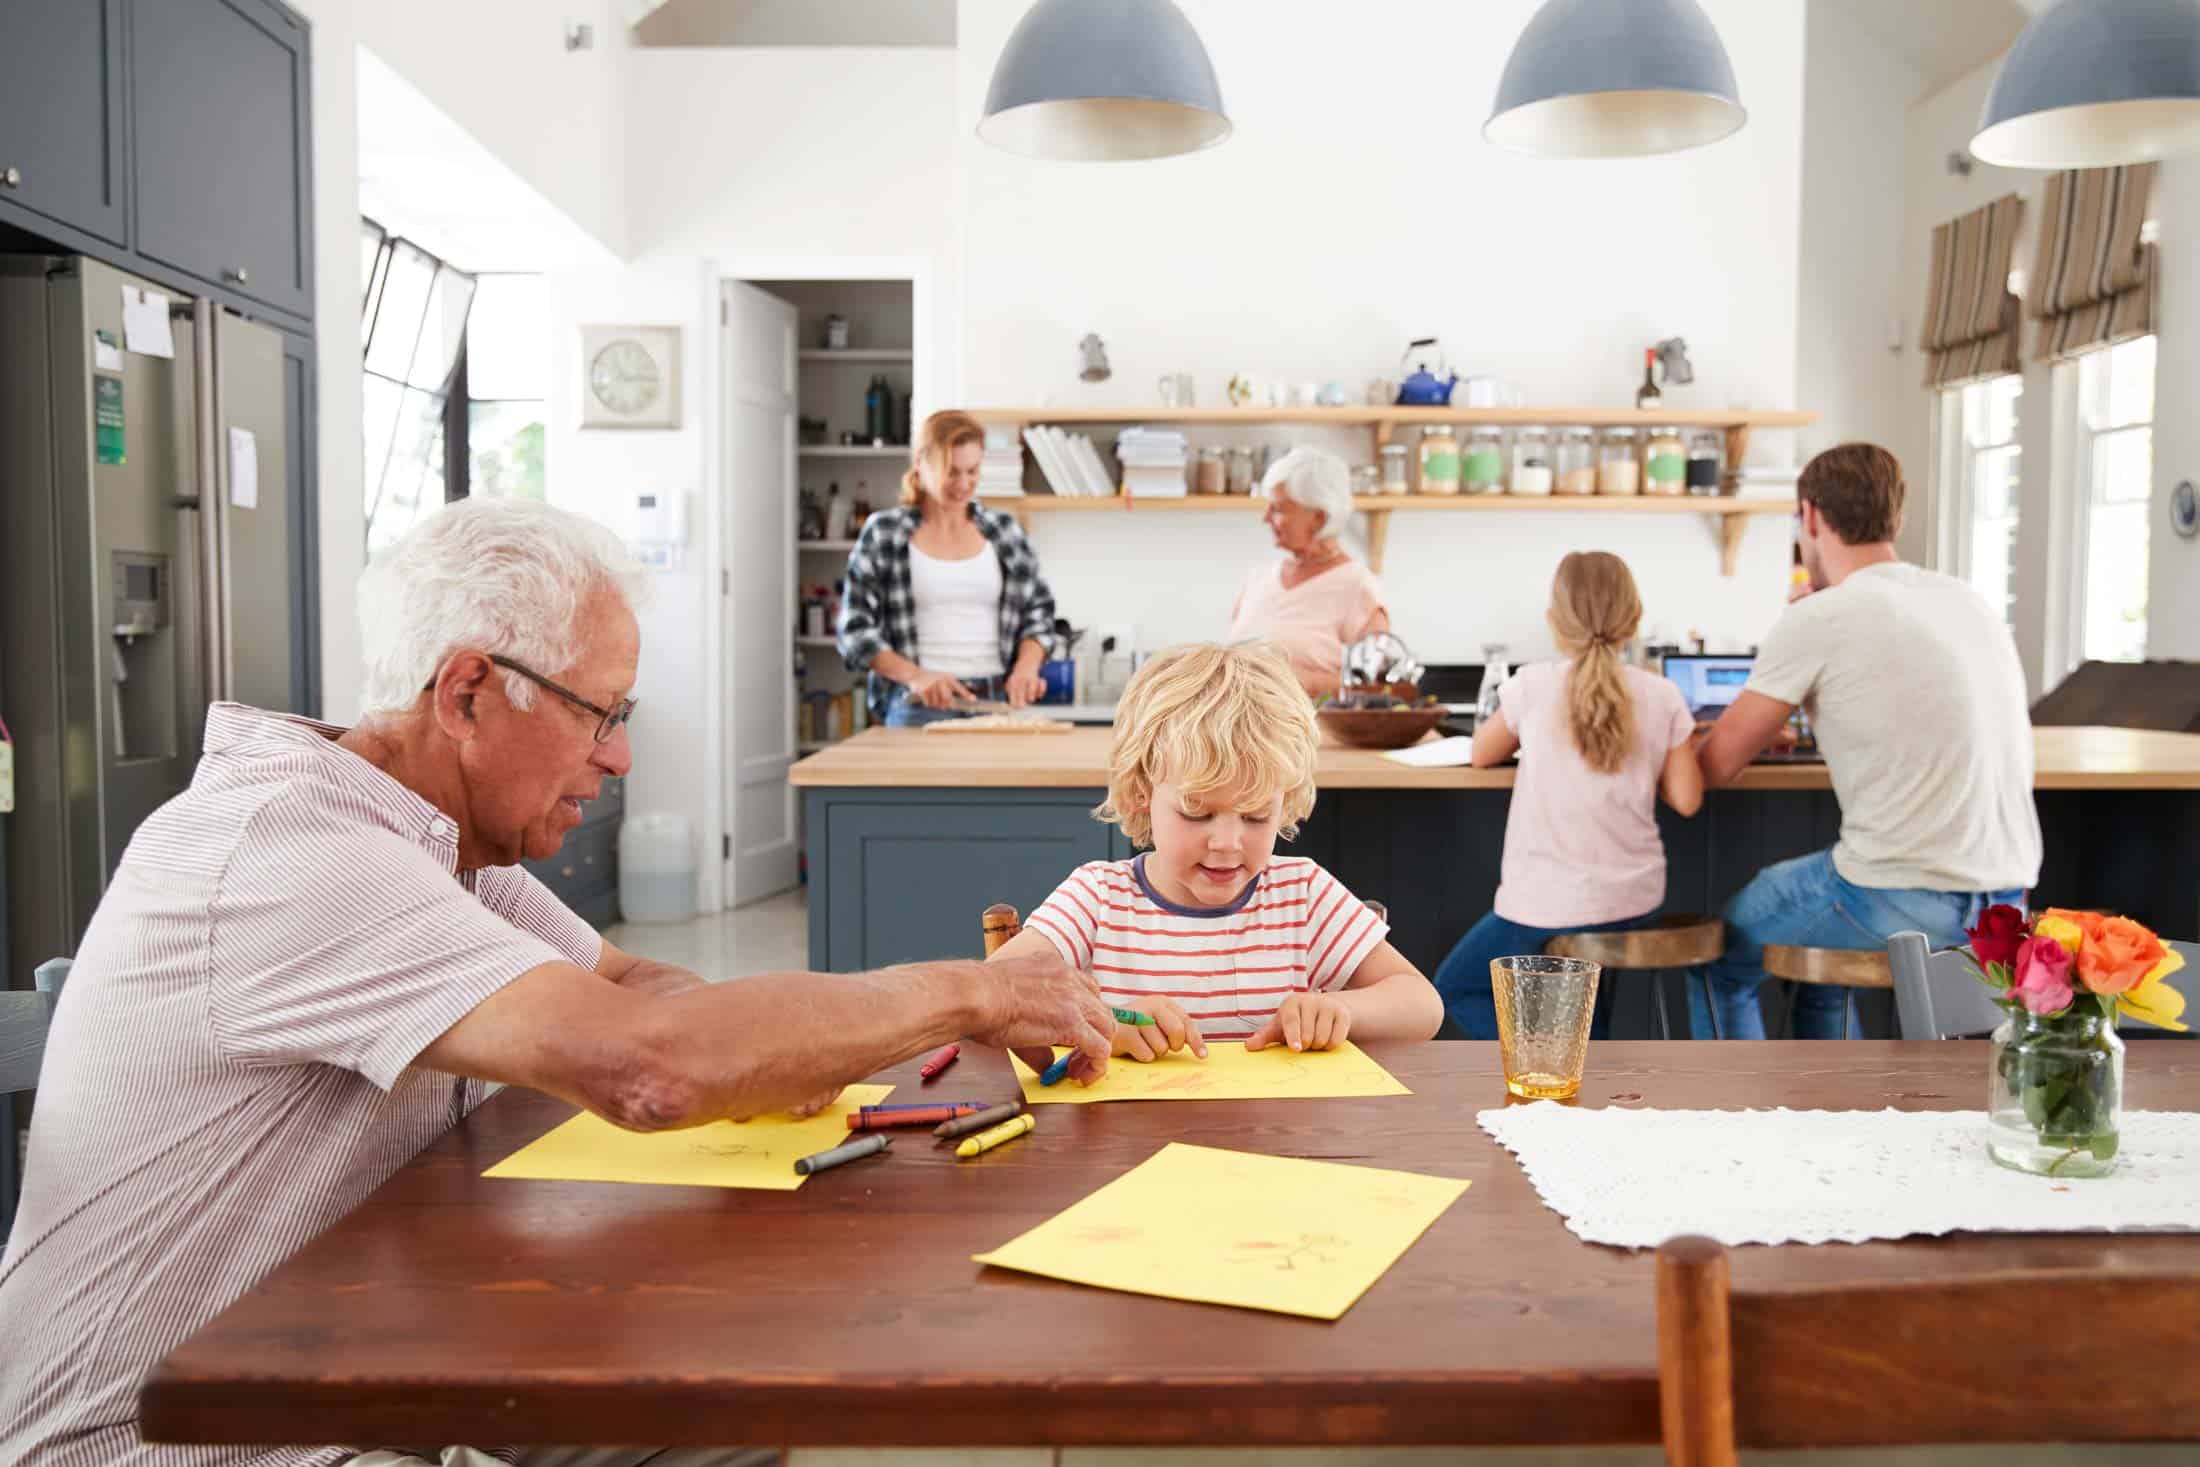 A picture of a family in their kitchen. One older man is helping a small child color a picture on the dining table.